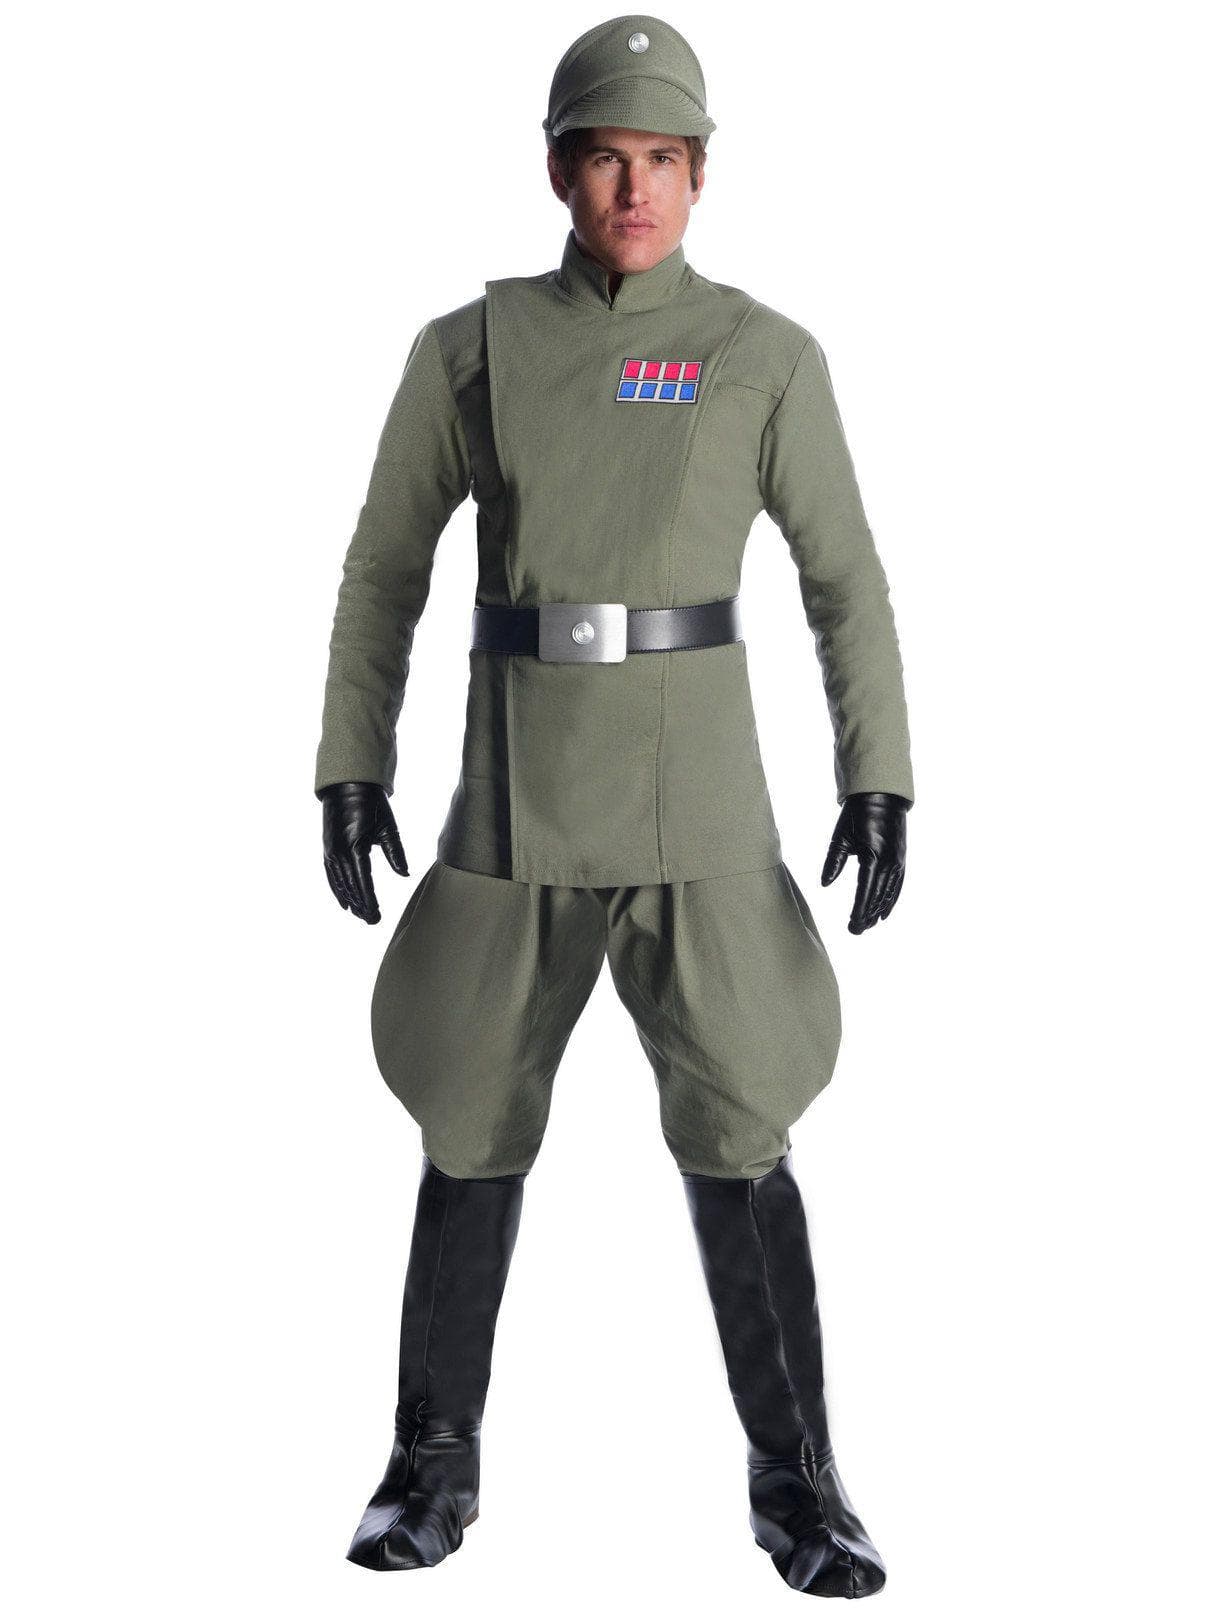 Adult Classic Star Wars Imperial Guard Costume - costumes.com